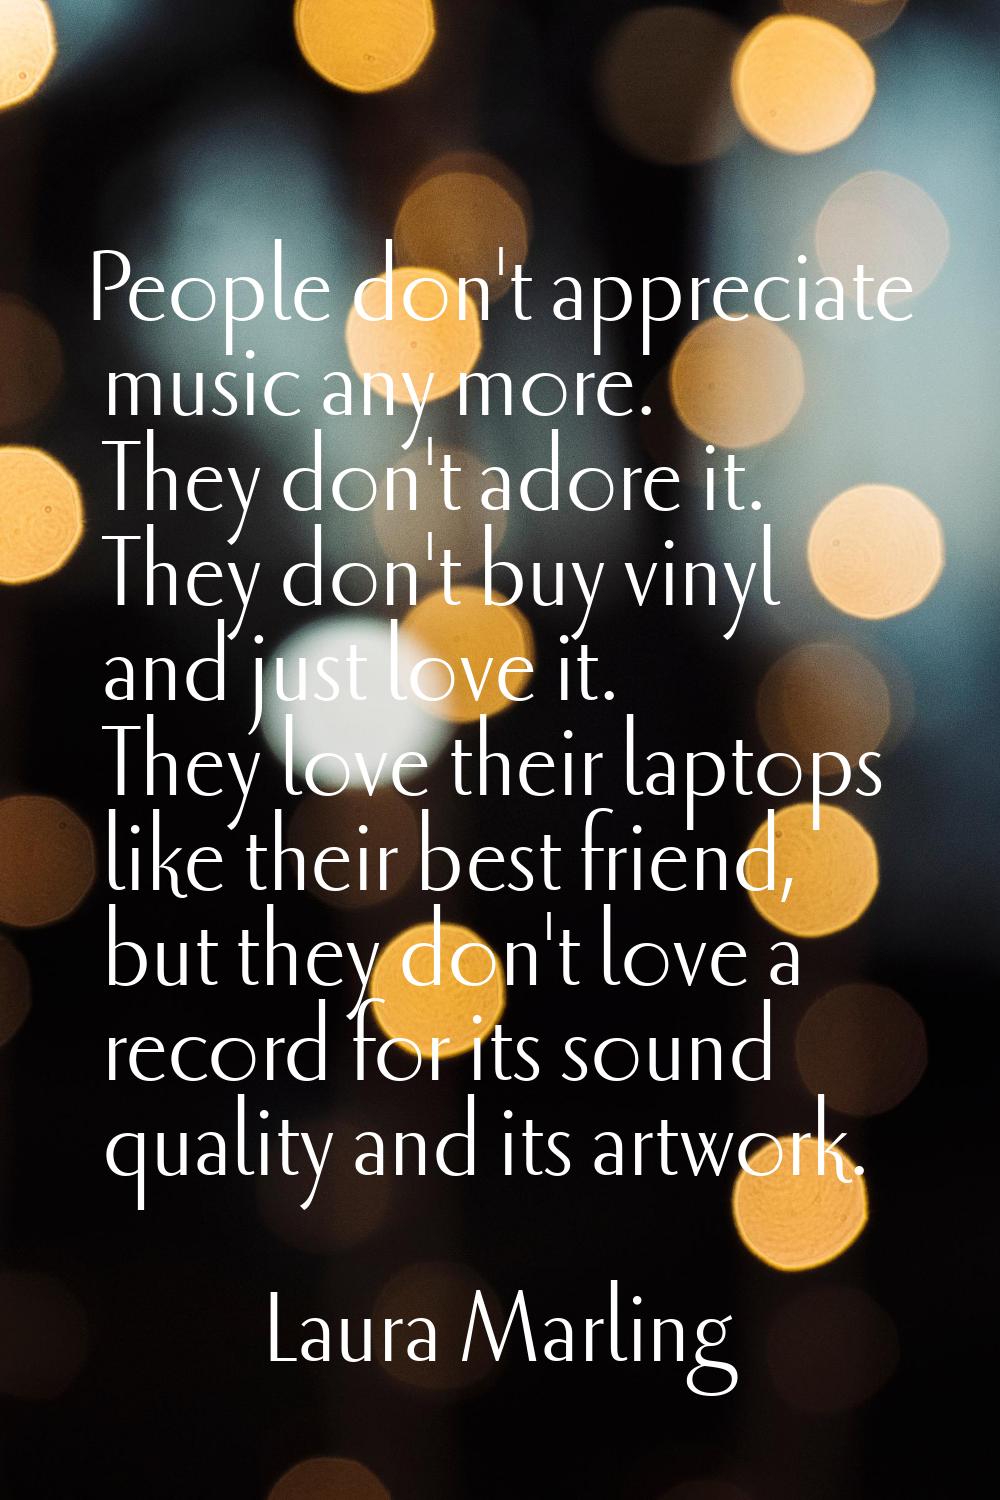 People don't appreciate music any more. They don't adore it. They don't buy vinyl and just love it.